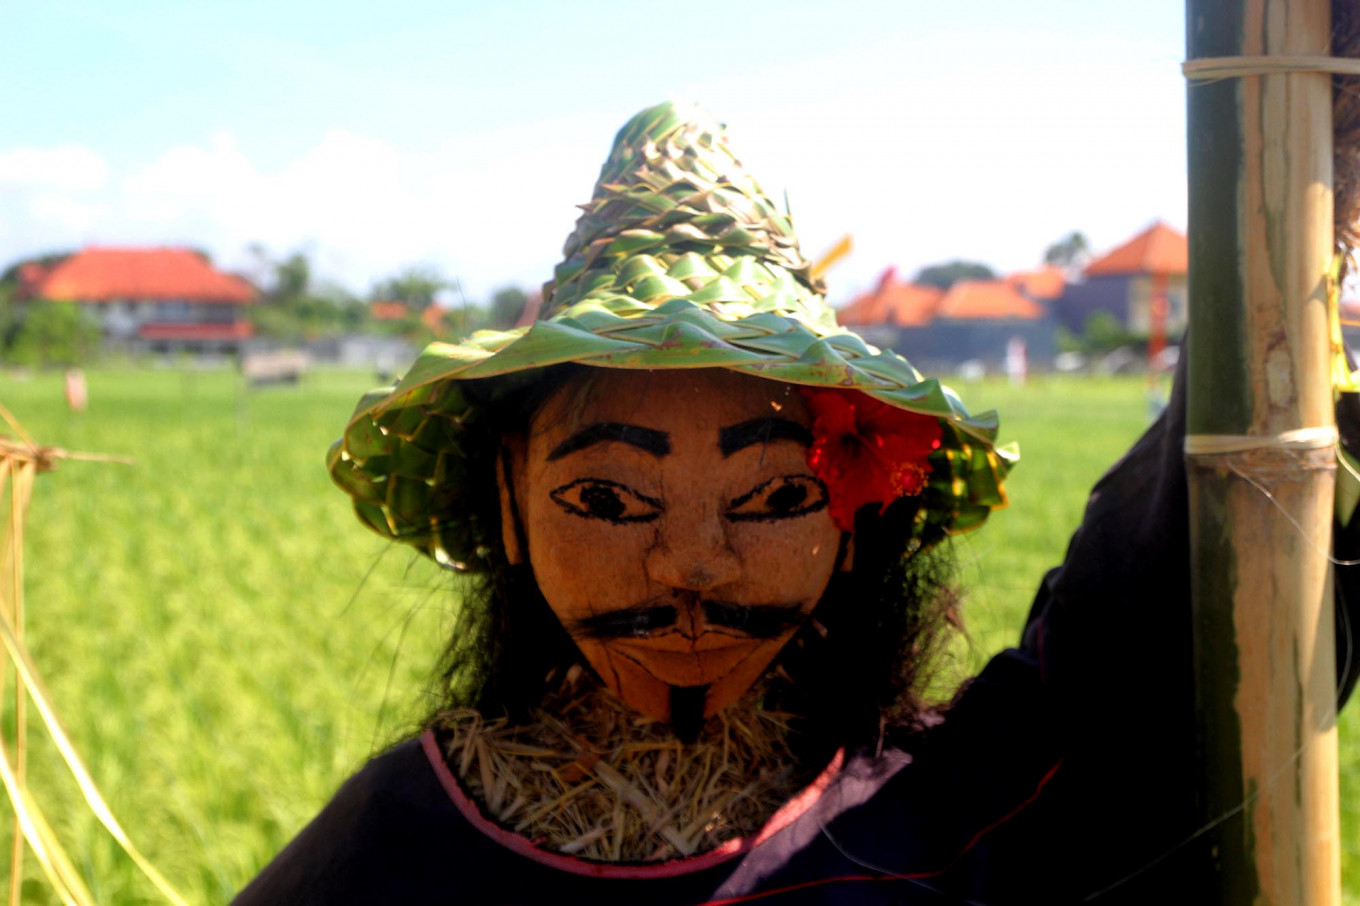 Farmers put a straw hat on top of a scarecrow. Three agritech startups involved in helping farmers, Eragano, Sayurbox and Tanihub, have been selected to take part in Grab’s second Grab Ventures Velocity accelerator program. (JP/Zul Trio Anggono)